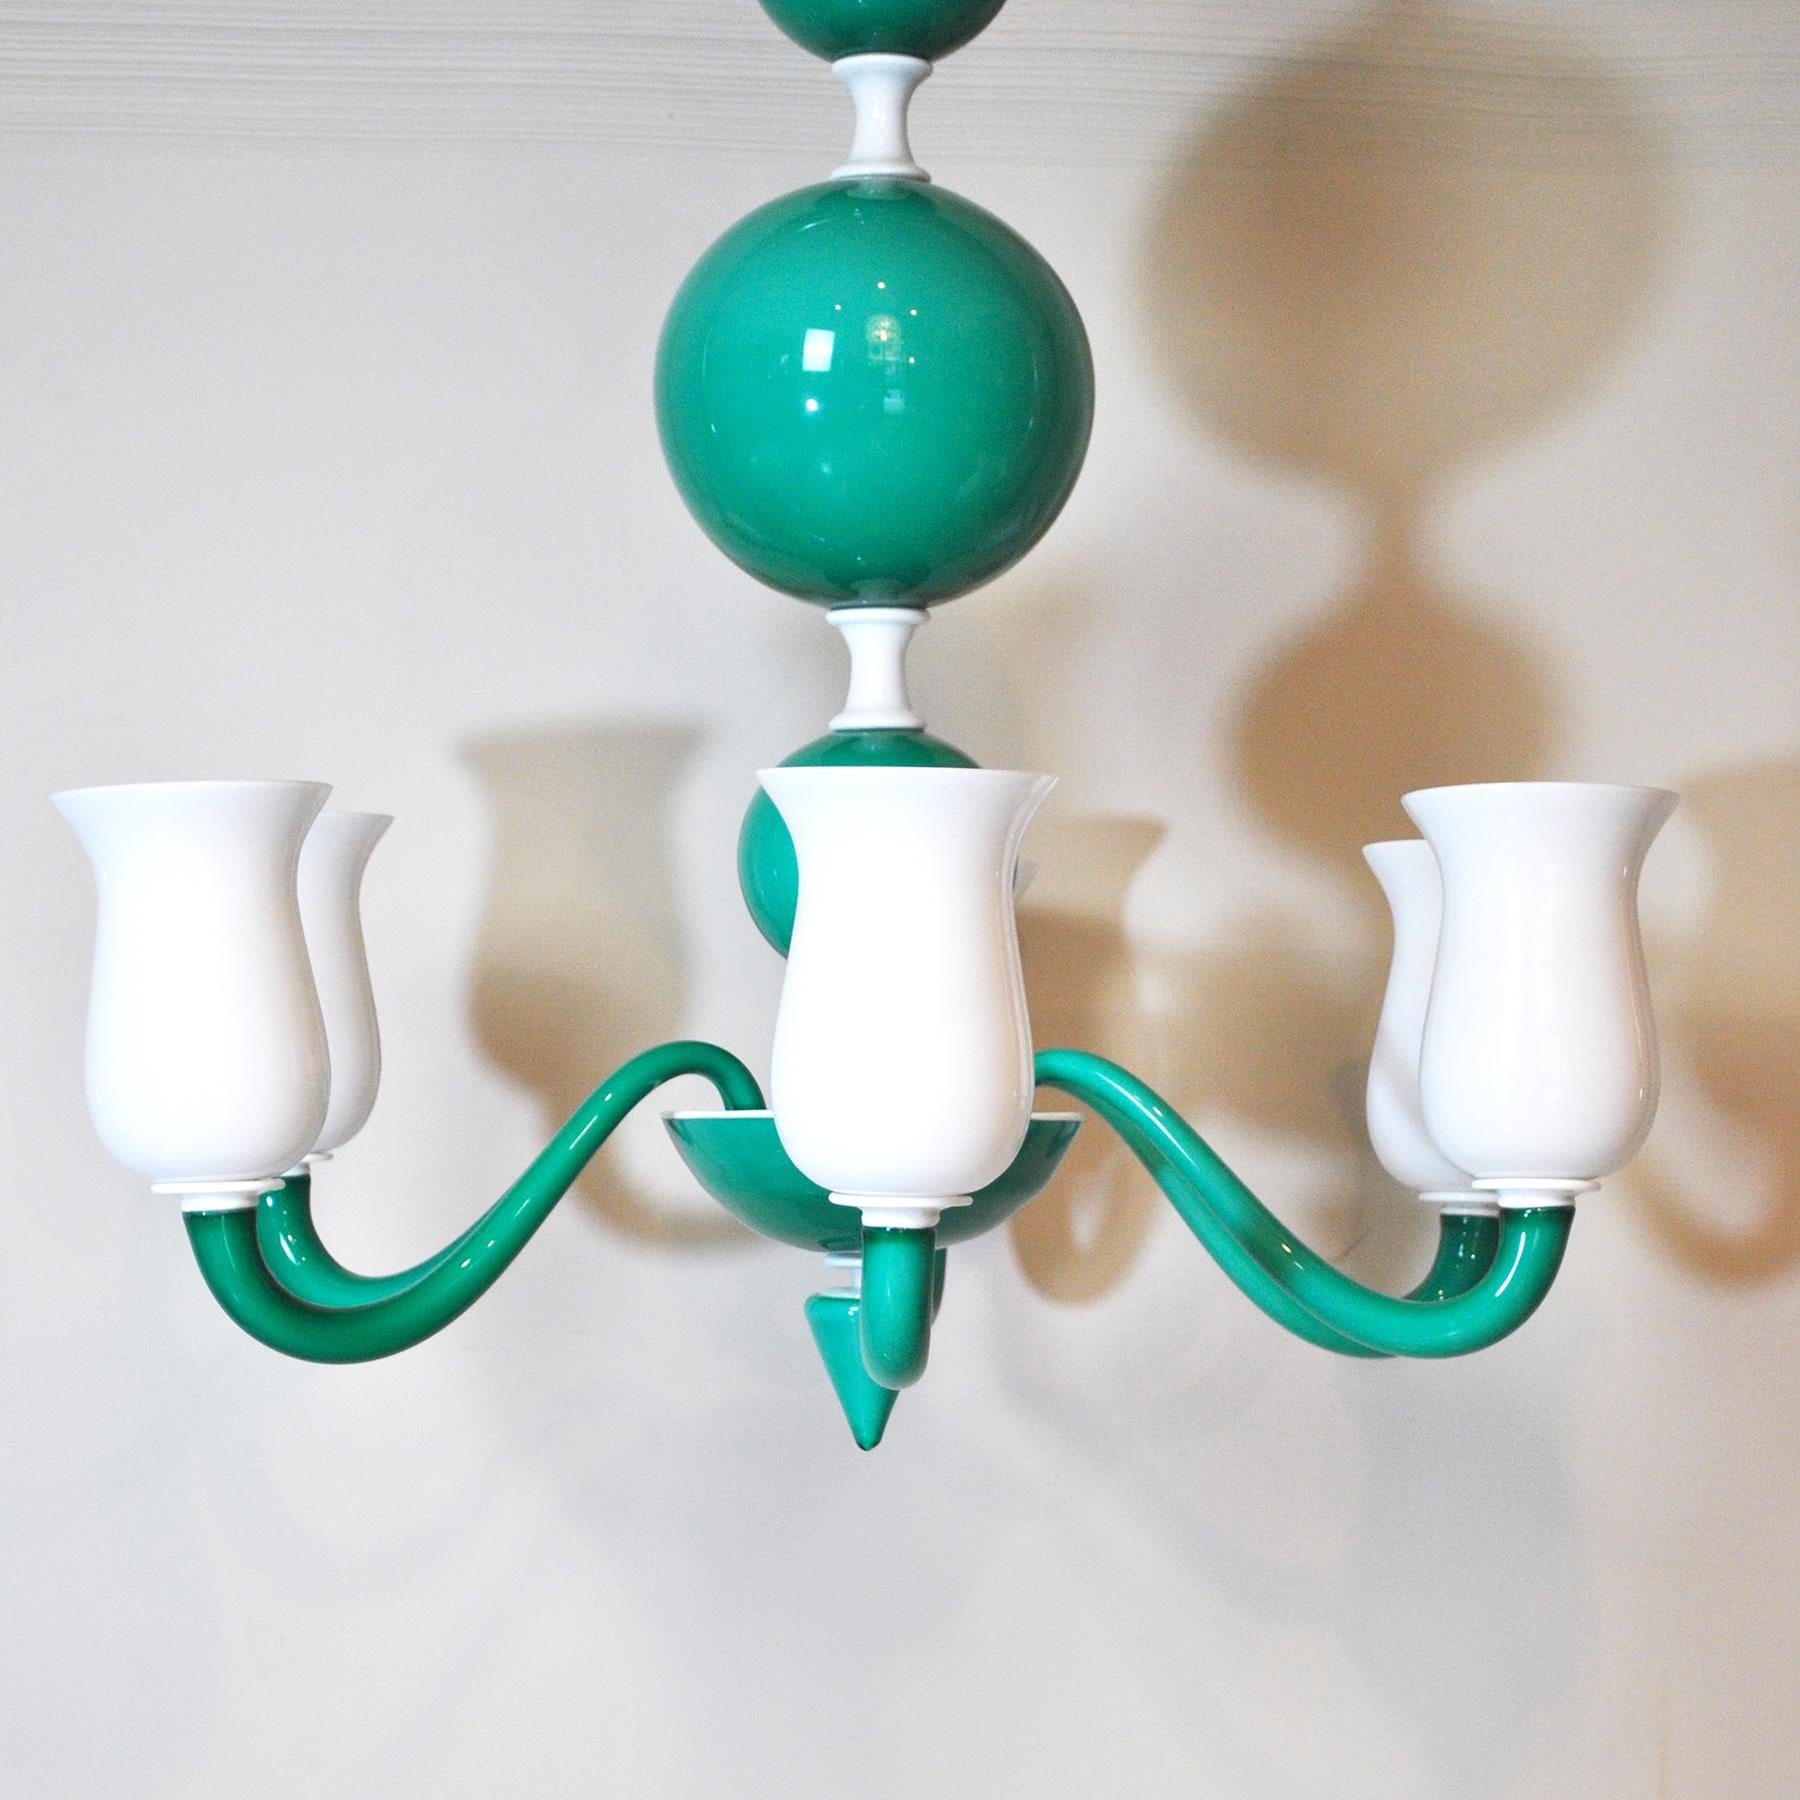 Mid-20th Century Venini Suspension Lamp a Variant of Model N. 99.41 Gio Ponti For Sale